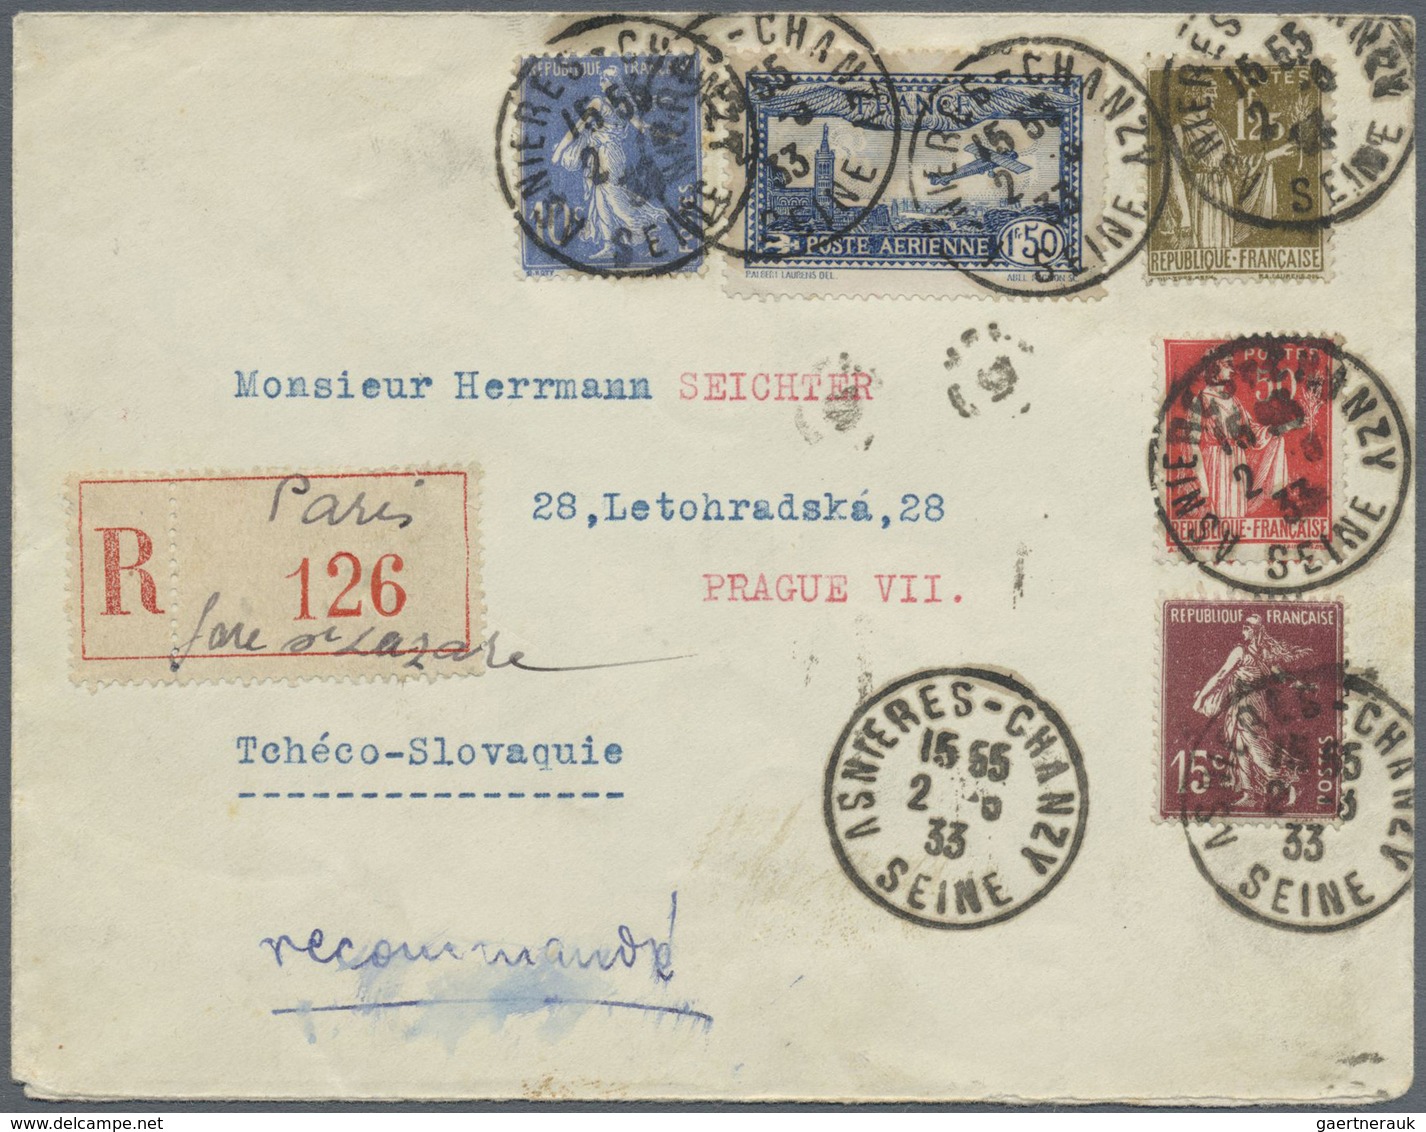 Br Frankreich: 1932/1945, TYPE "PAIX", accumulation of apprx. 1.000 (mainly commercial) covers/cards, c